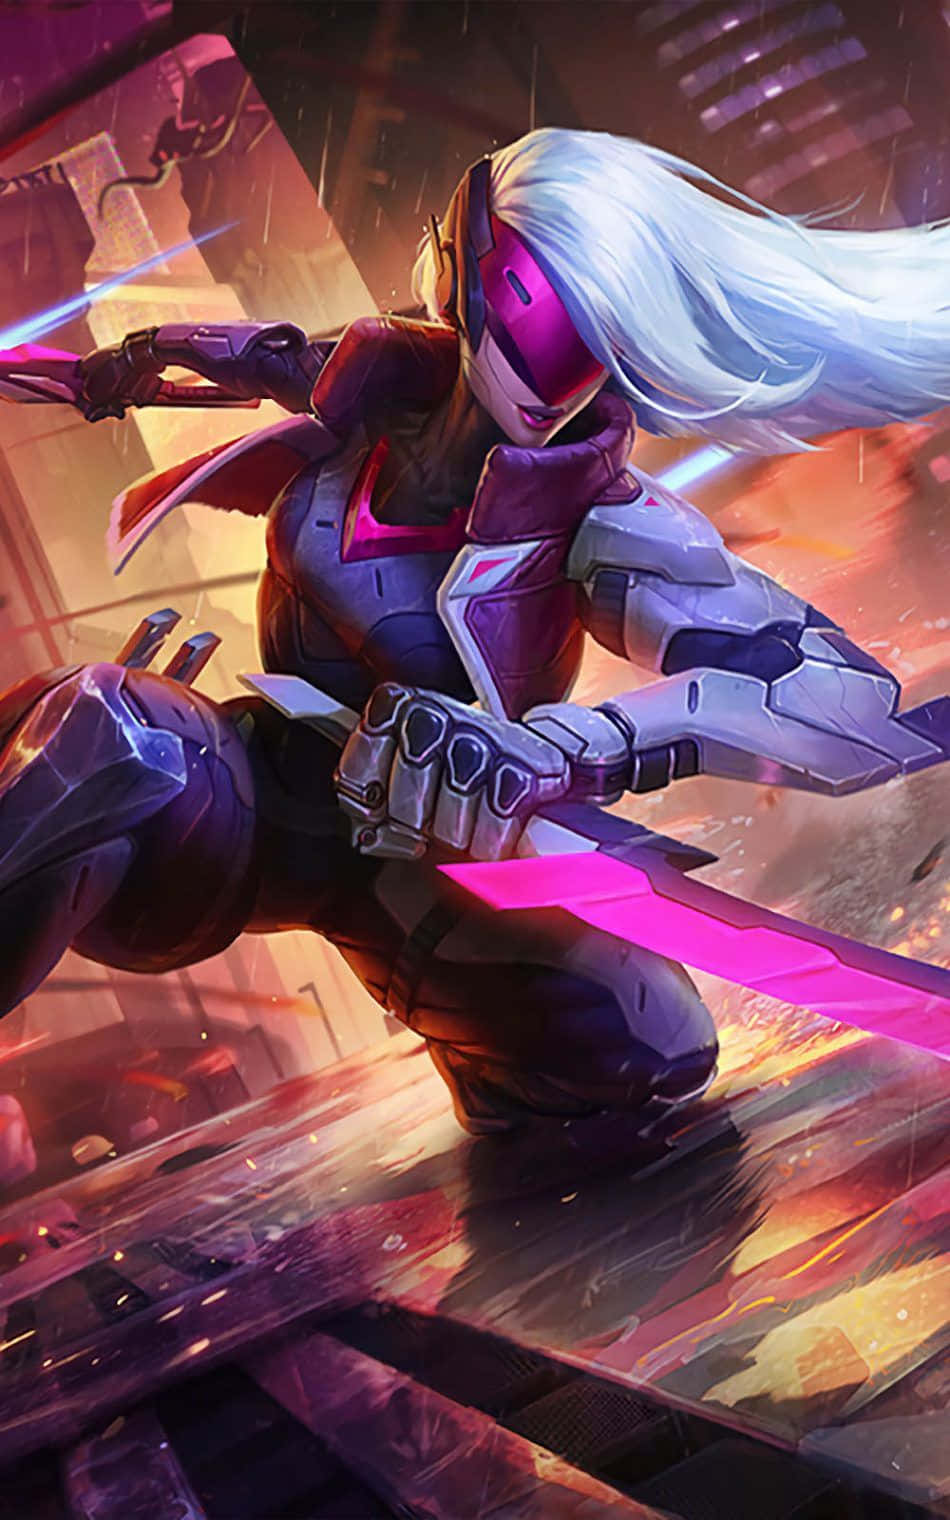 Get Ready For Intense Action With League Of Legends On Your Phone Background